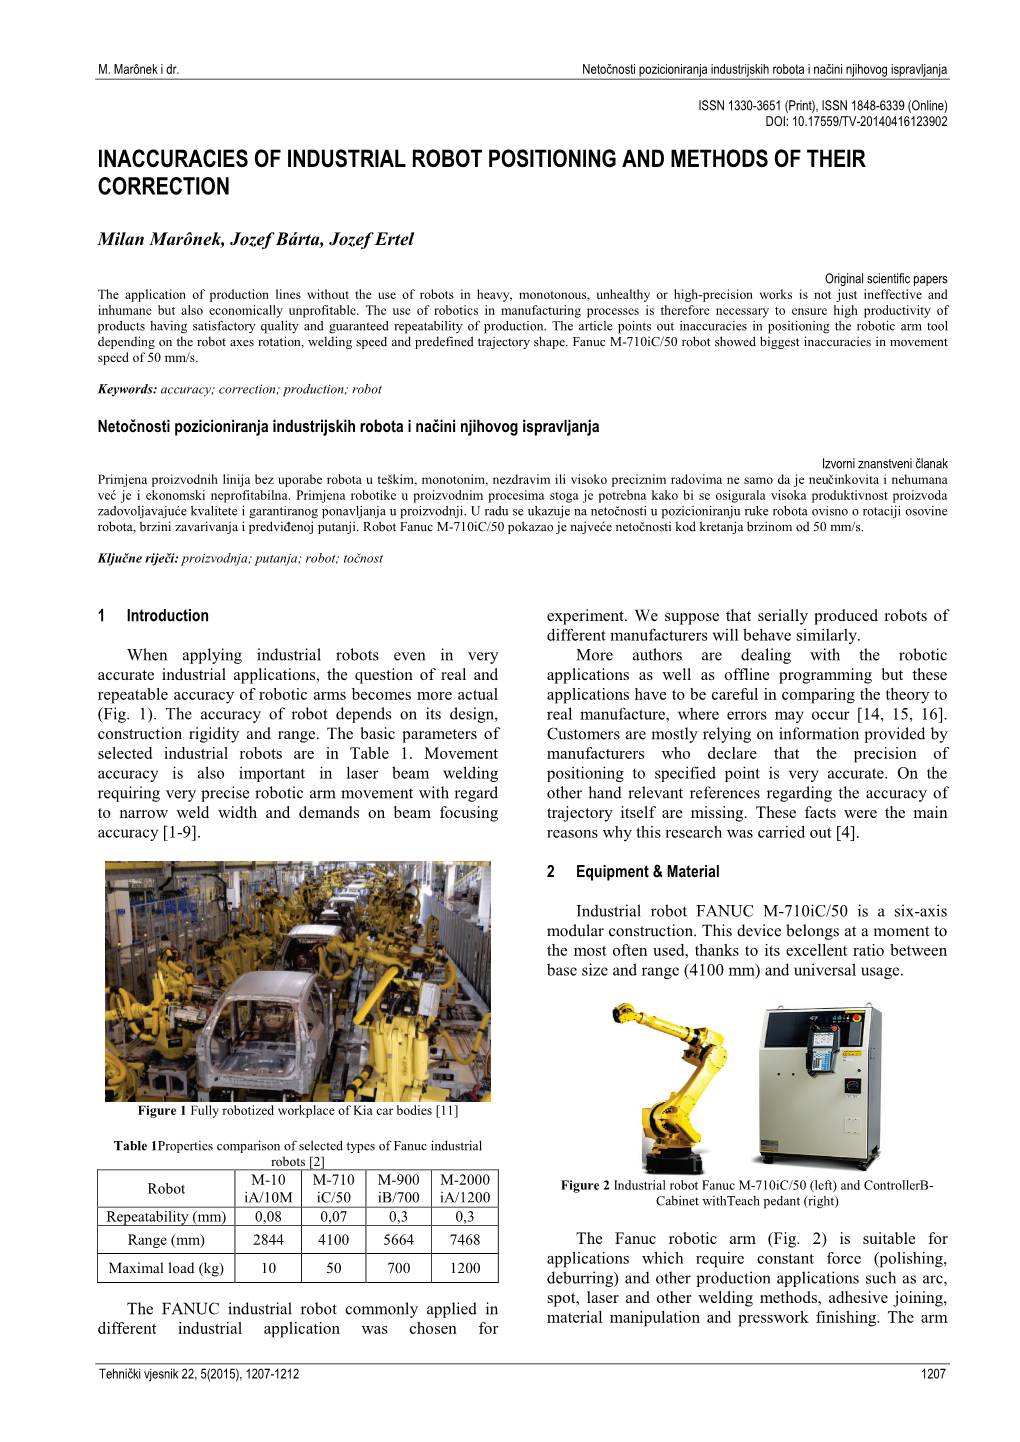 Inaccuracies of Industrial Robot Positioning and Methods of Their Correction